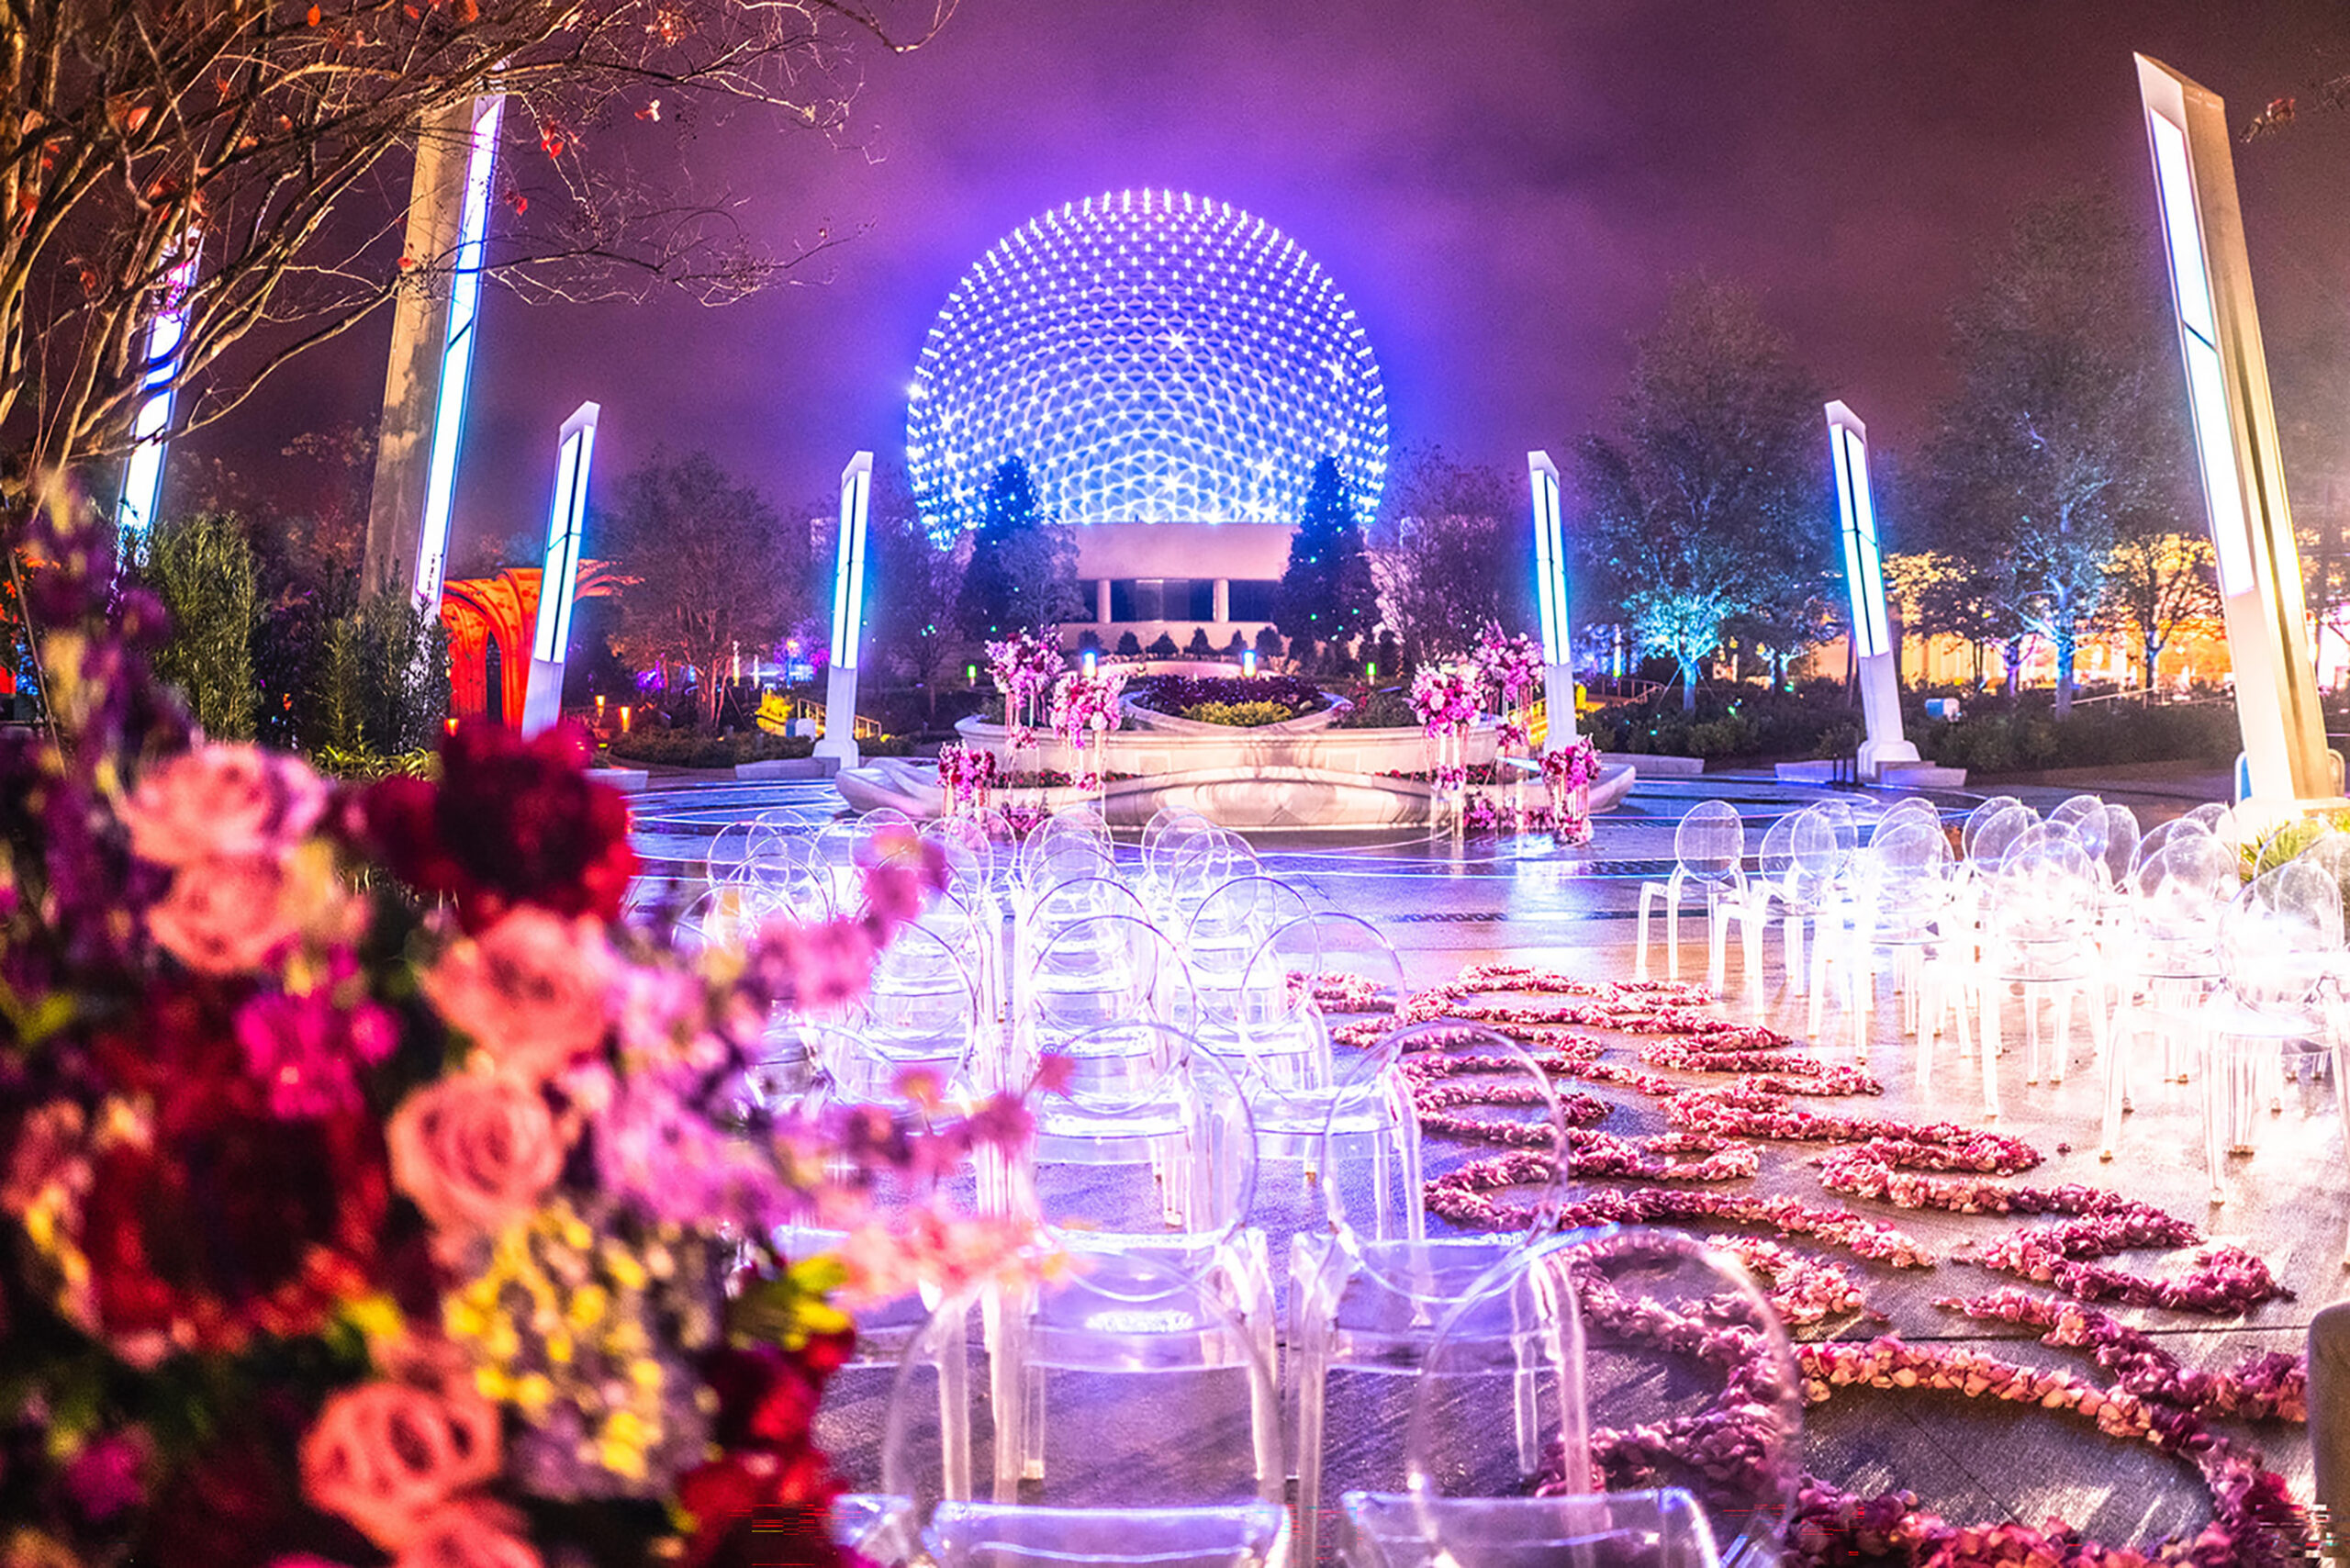 A truly inspired space, World Celebration Gardens represents dreams and connections making it a magical place to honor your love.